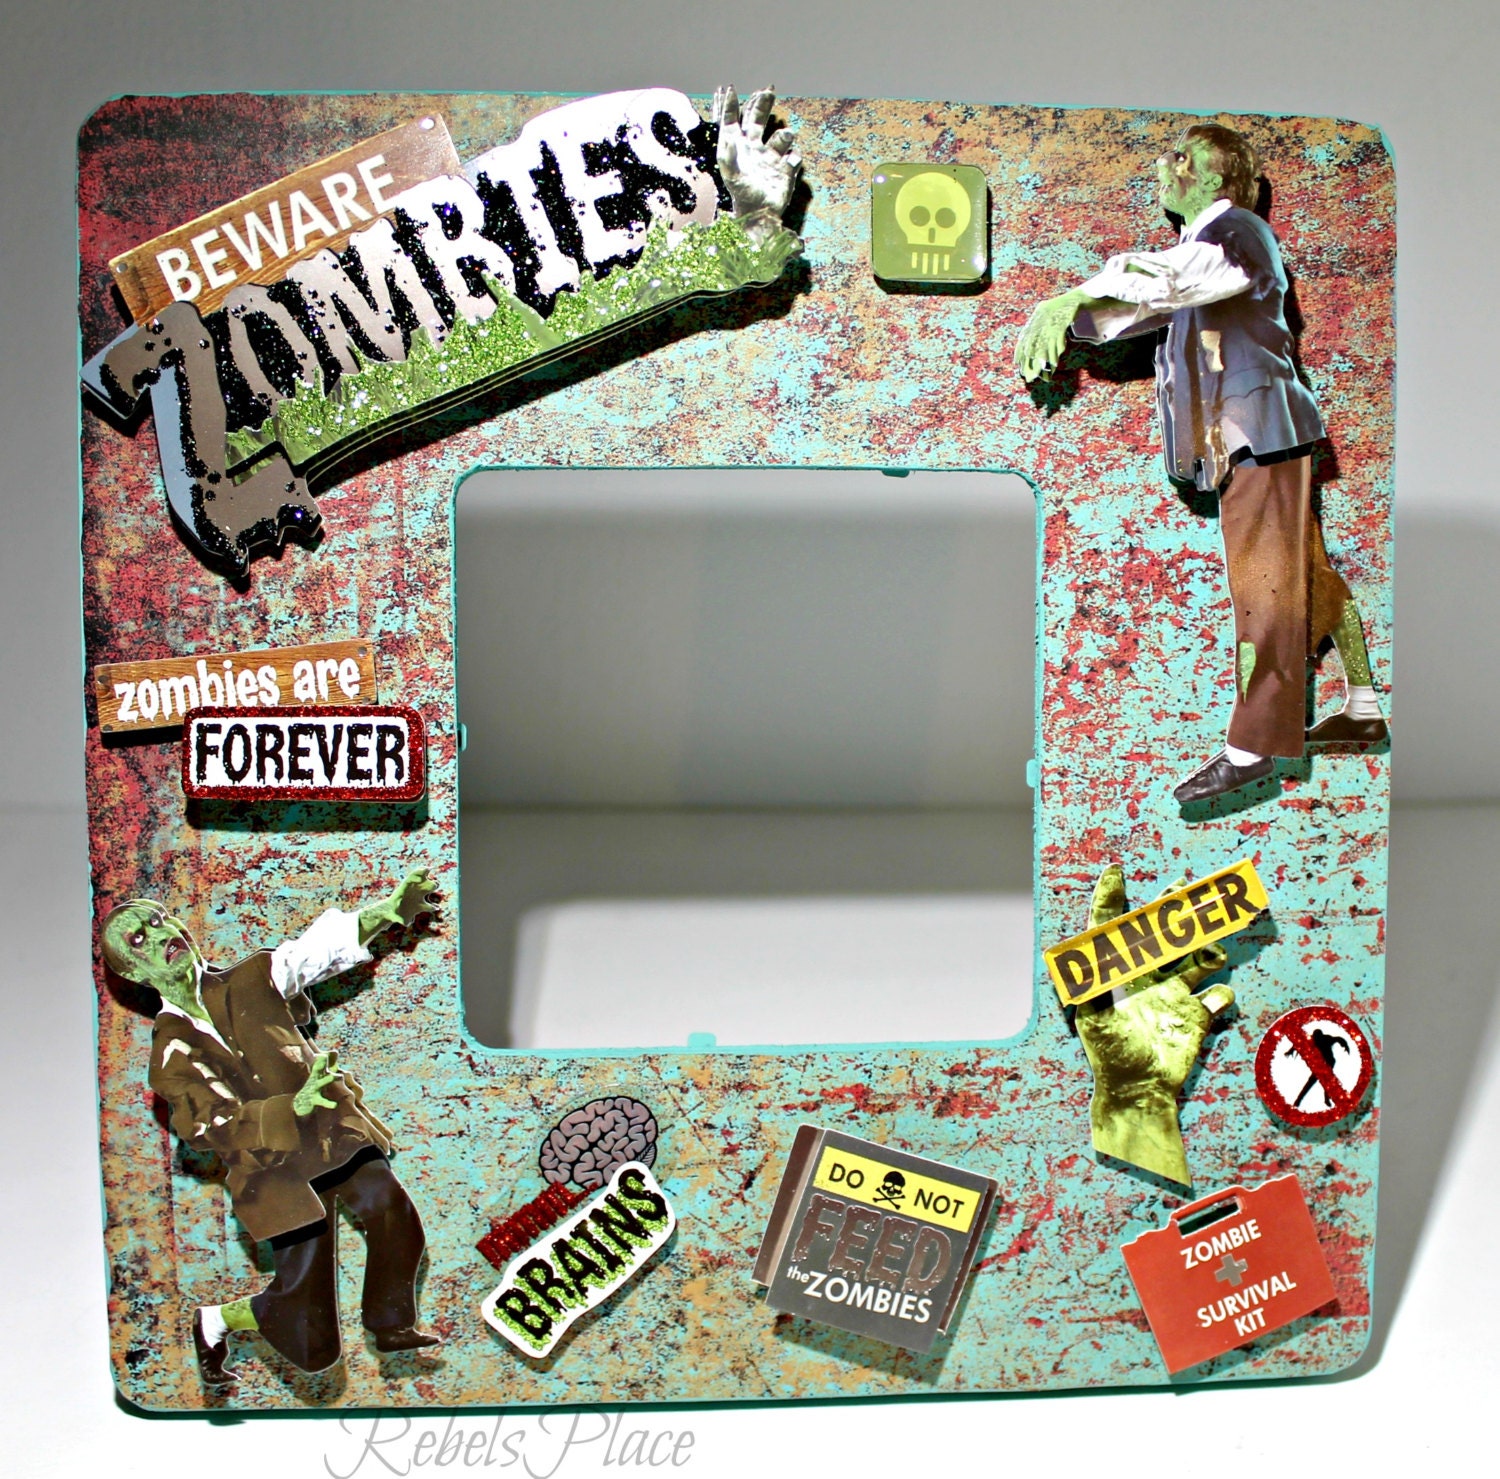 Zombie/ Zombies Fright /Halloween/ Scary Picture Frame